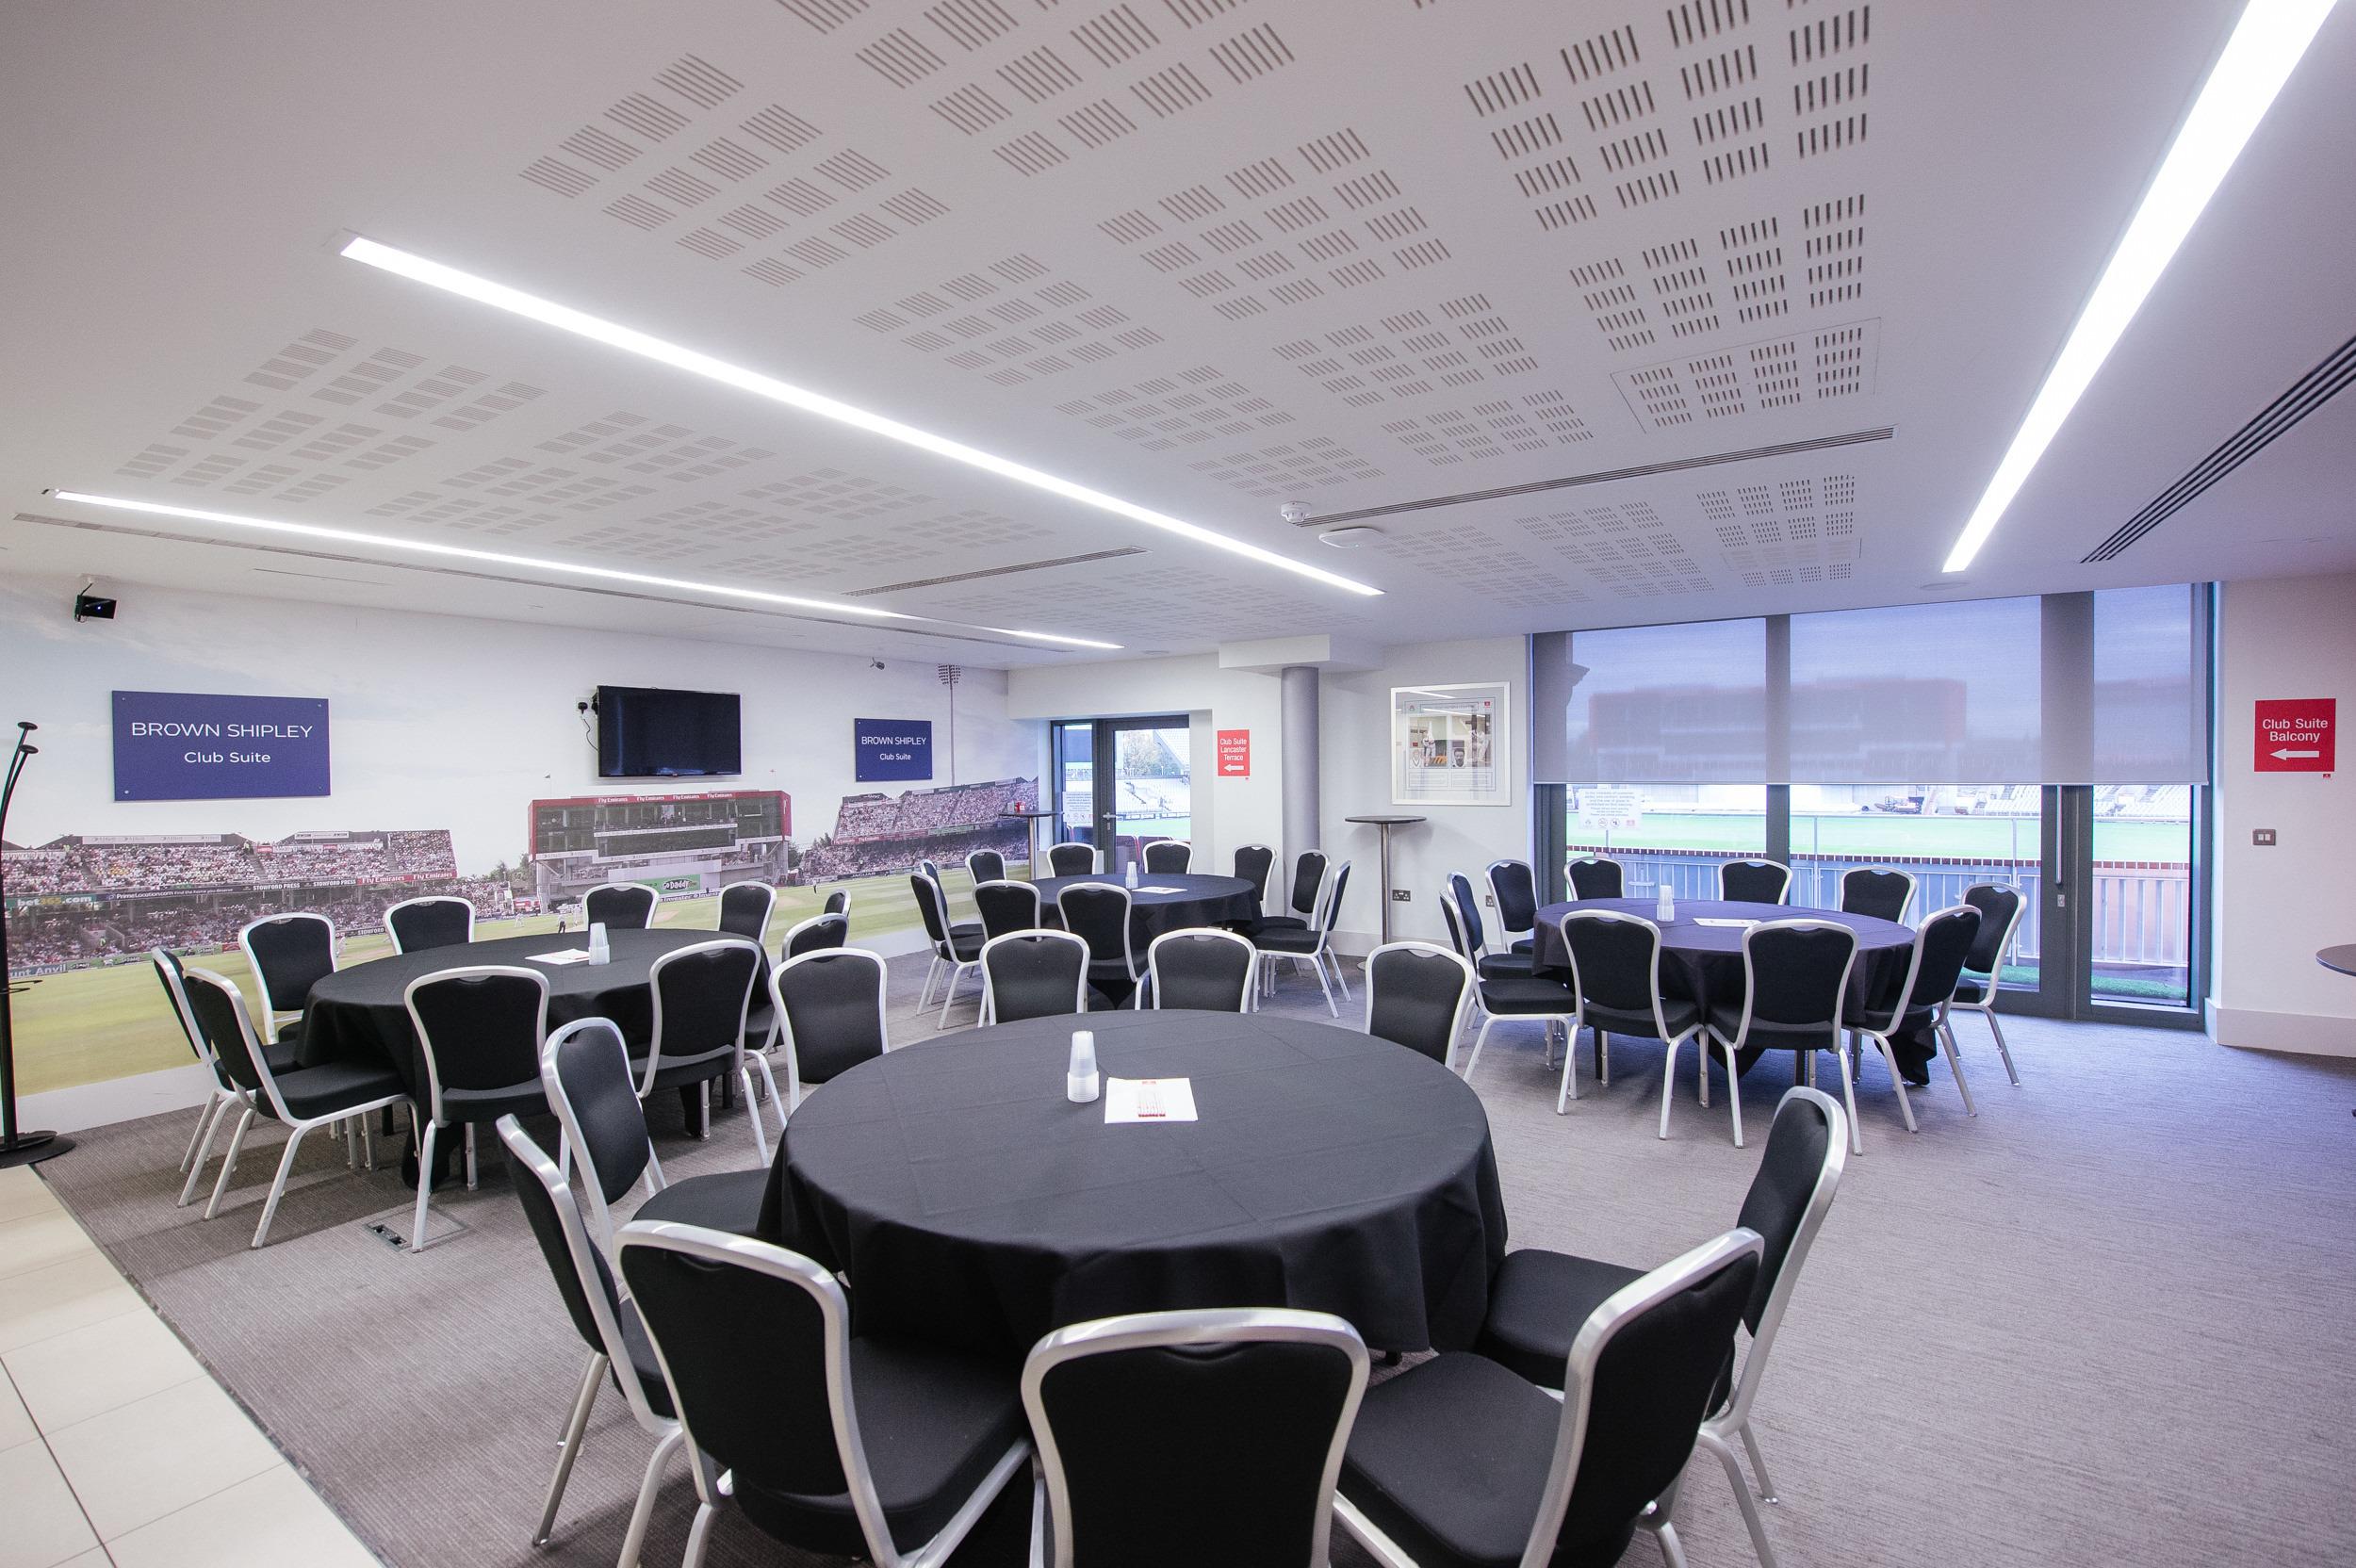 Emirates Old Trafford, The Brown Shipley Club Suite photo #0